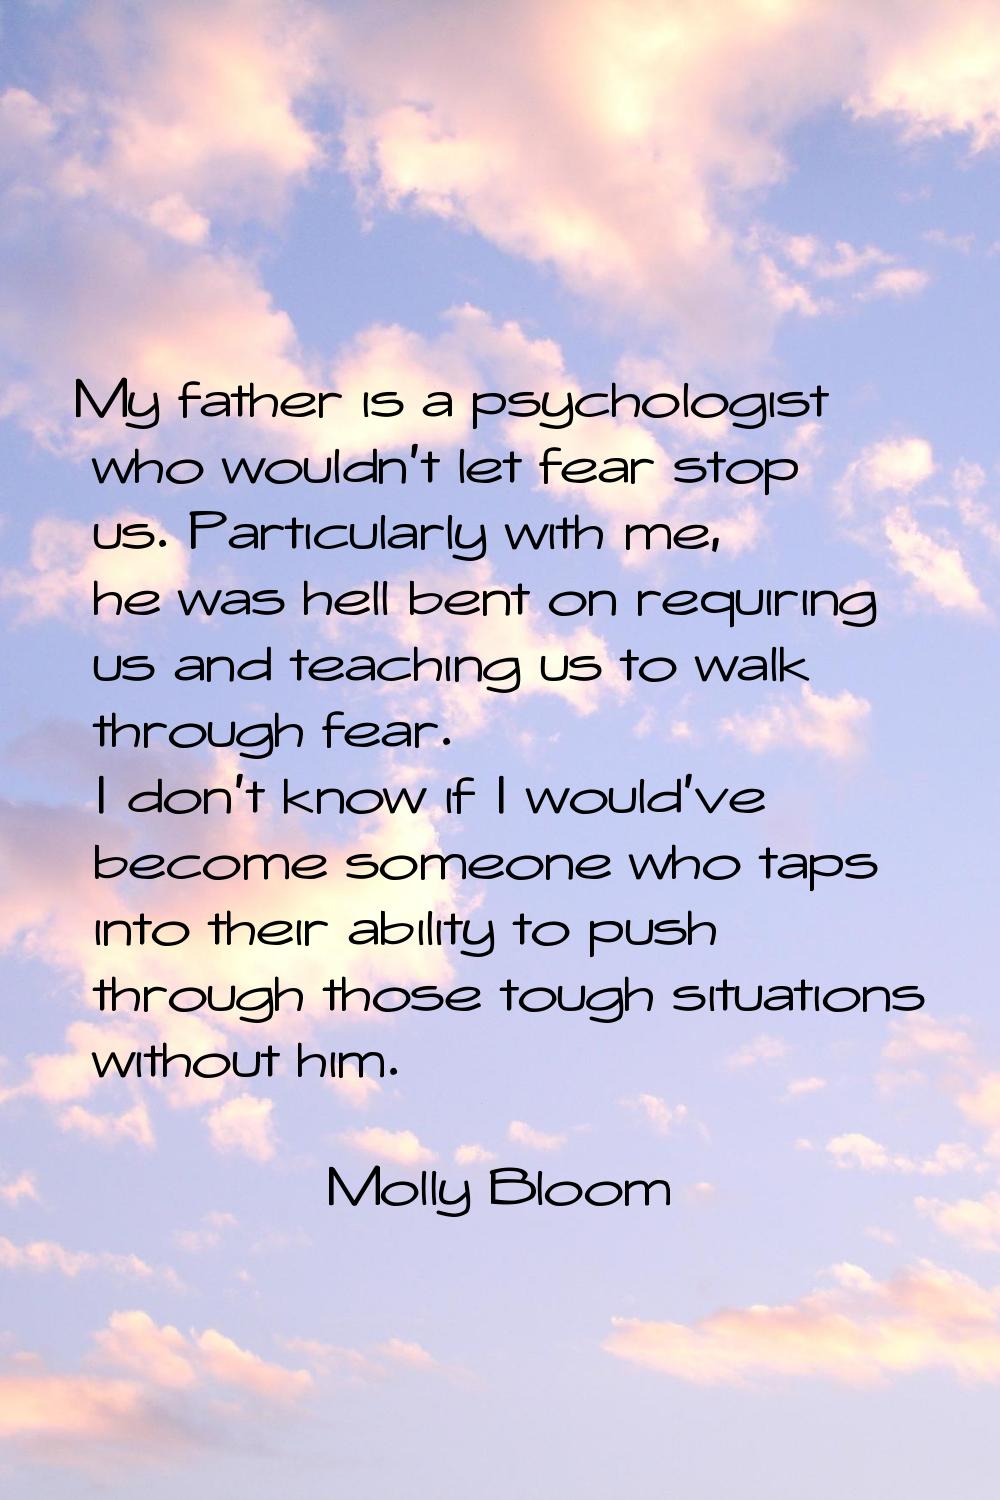 My father is a psychologist who wouldn't let fear stop us. Particularly with me, he was hell bent o